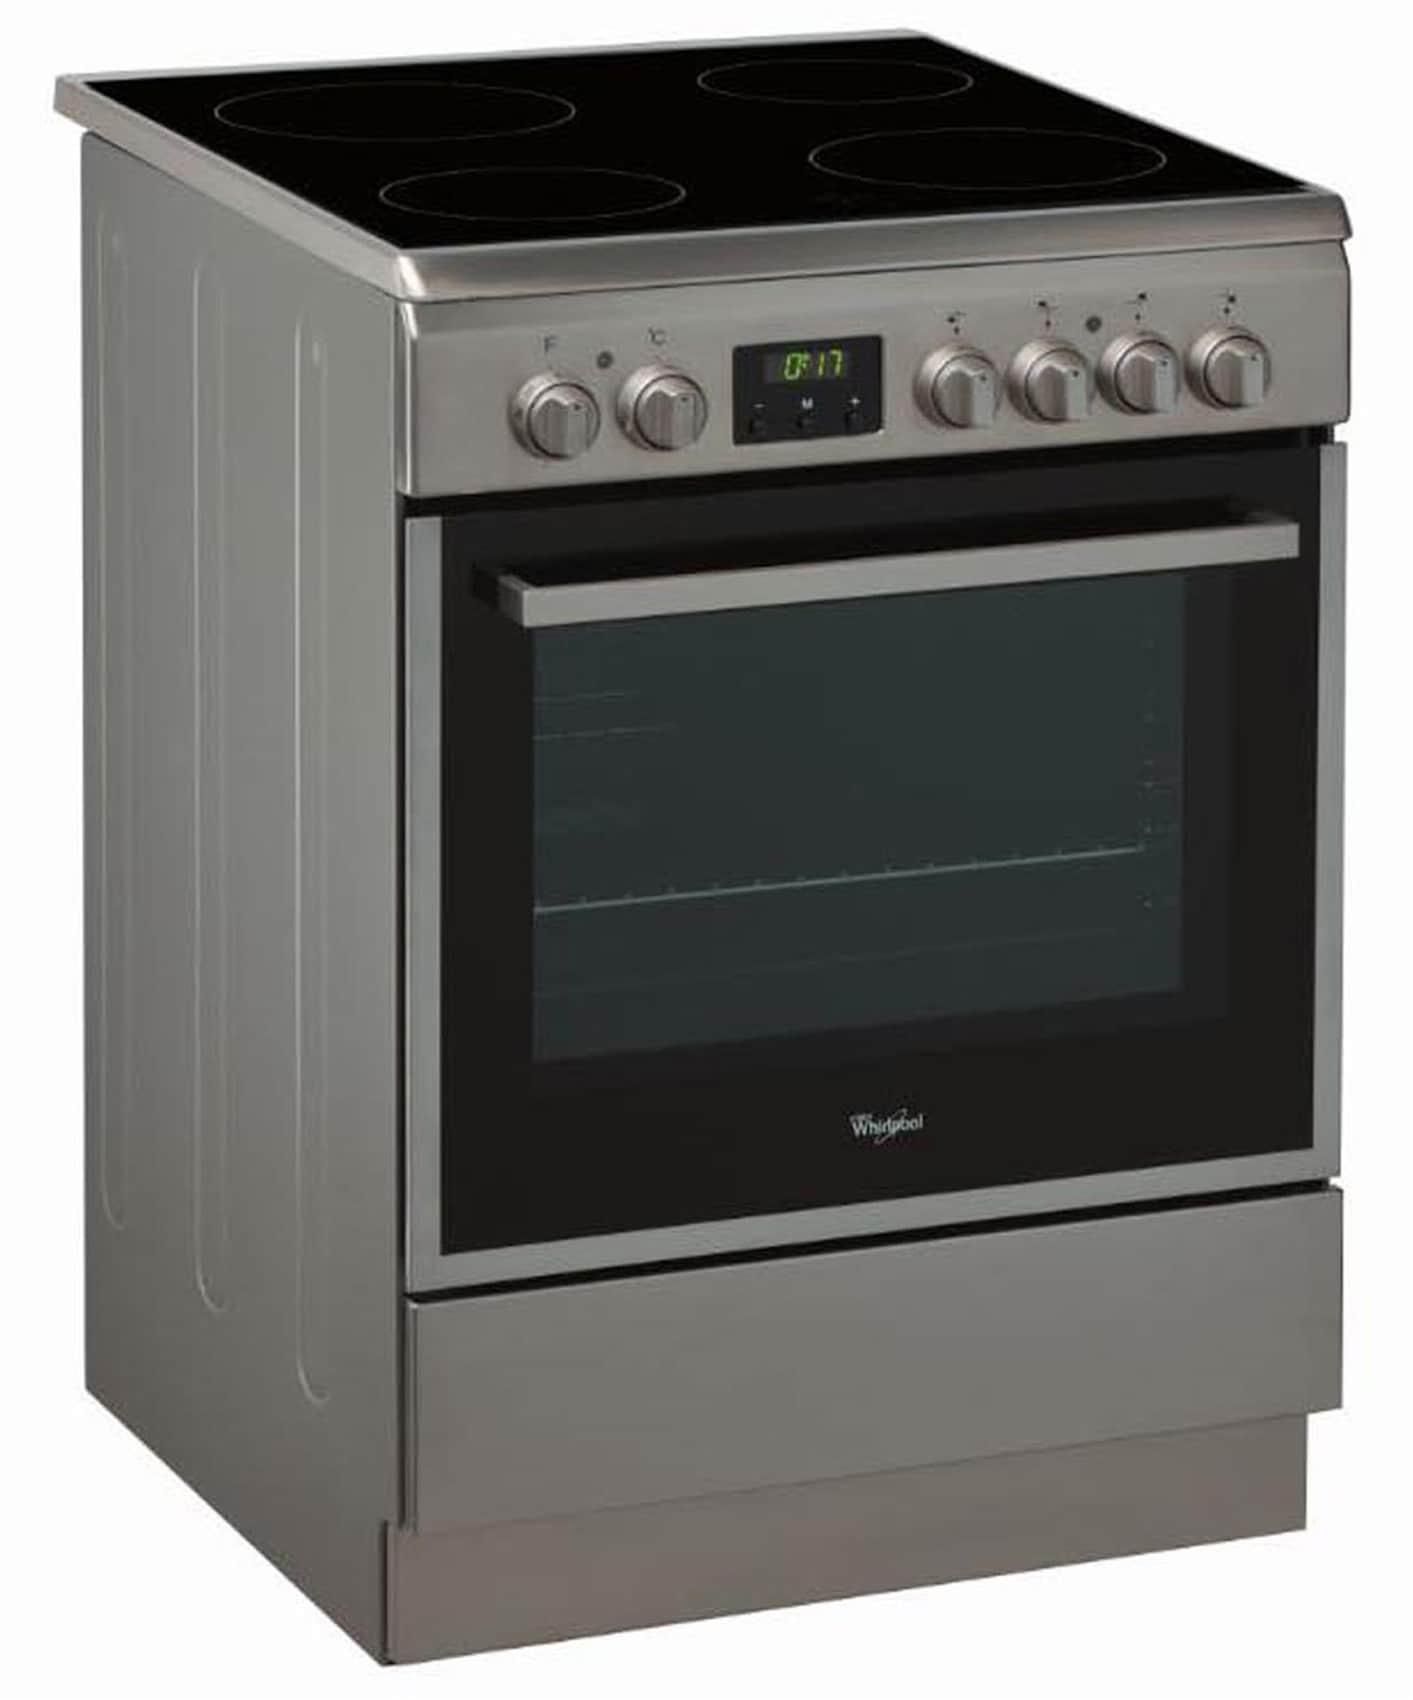 Whirlpool Free standing Ceramic 60X60 Cm Cooker with  4 Cooking Zones ,Stainless Steel  ACMT 65